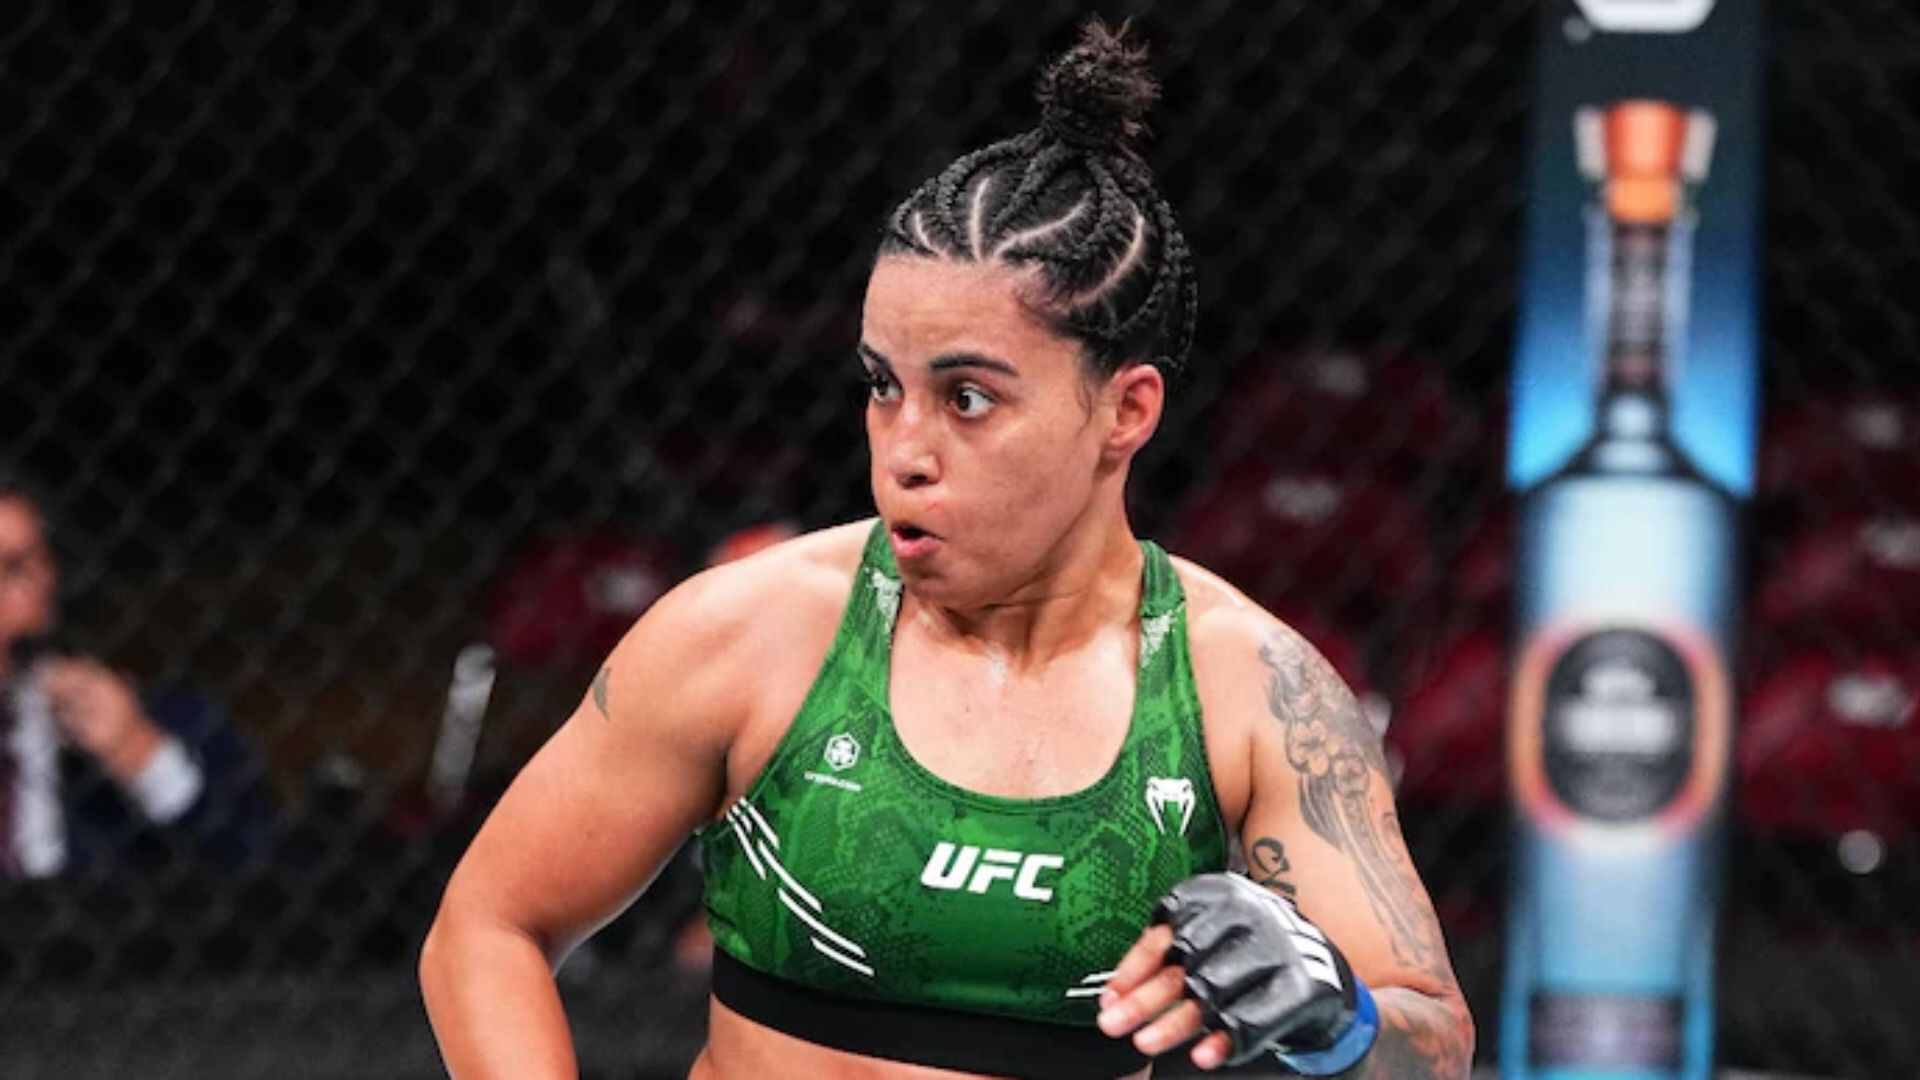 Puja Tomar Makes UFC History As First Indian Fighter To Win – Watch the Moment